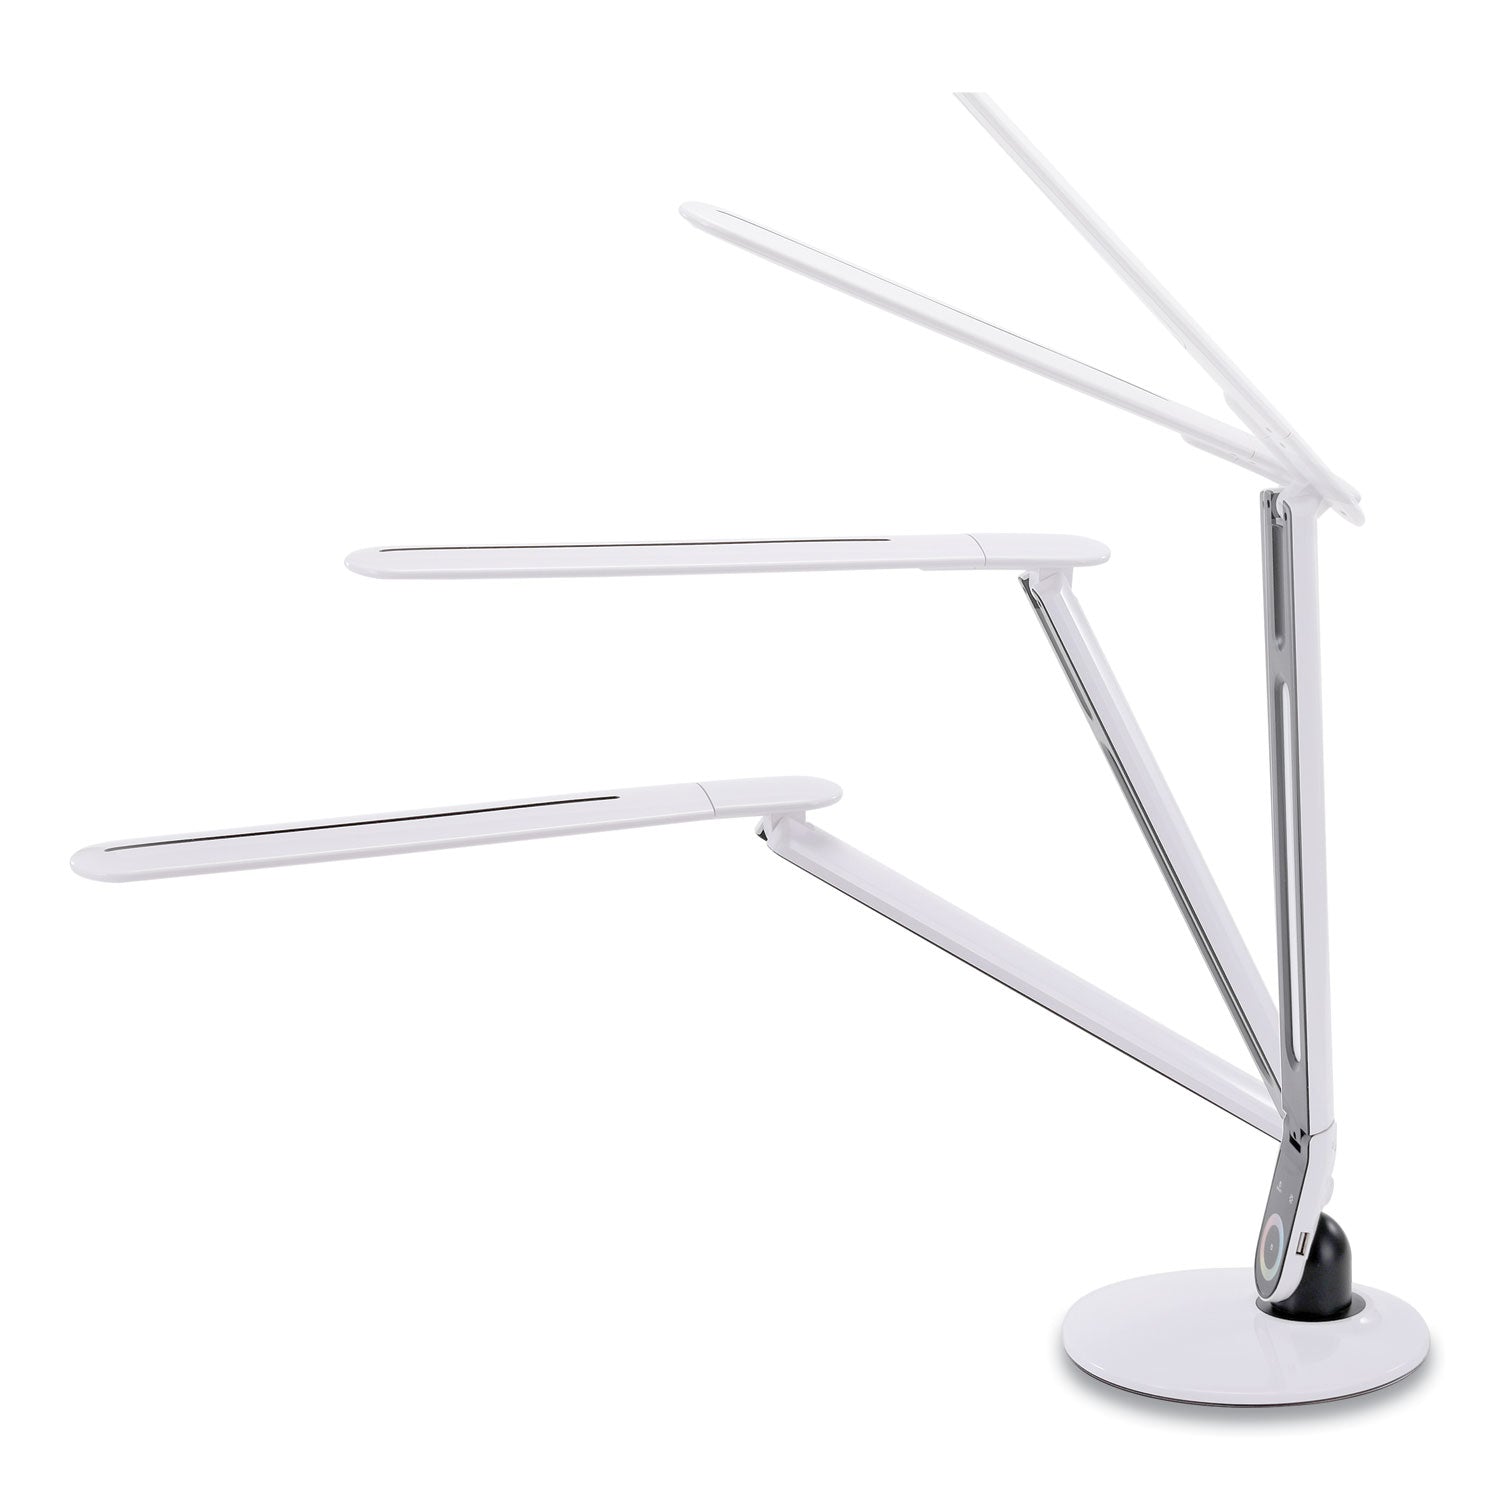 color-changing-led-desk-lamp-with-rgb-arm-1812-high-white_bosvled1605bos - 7